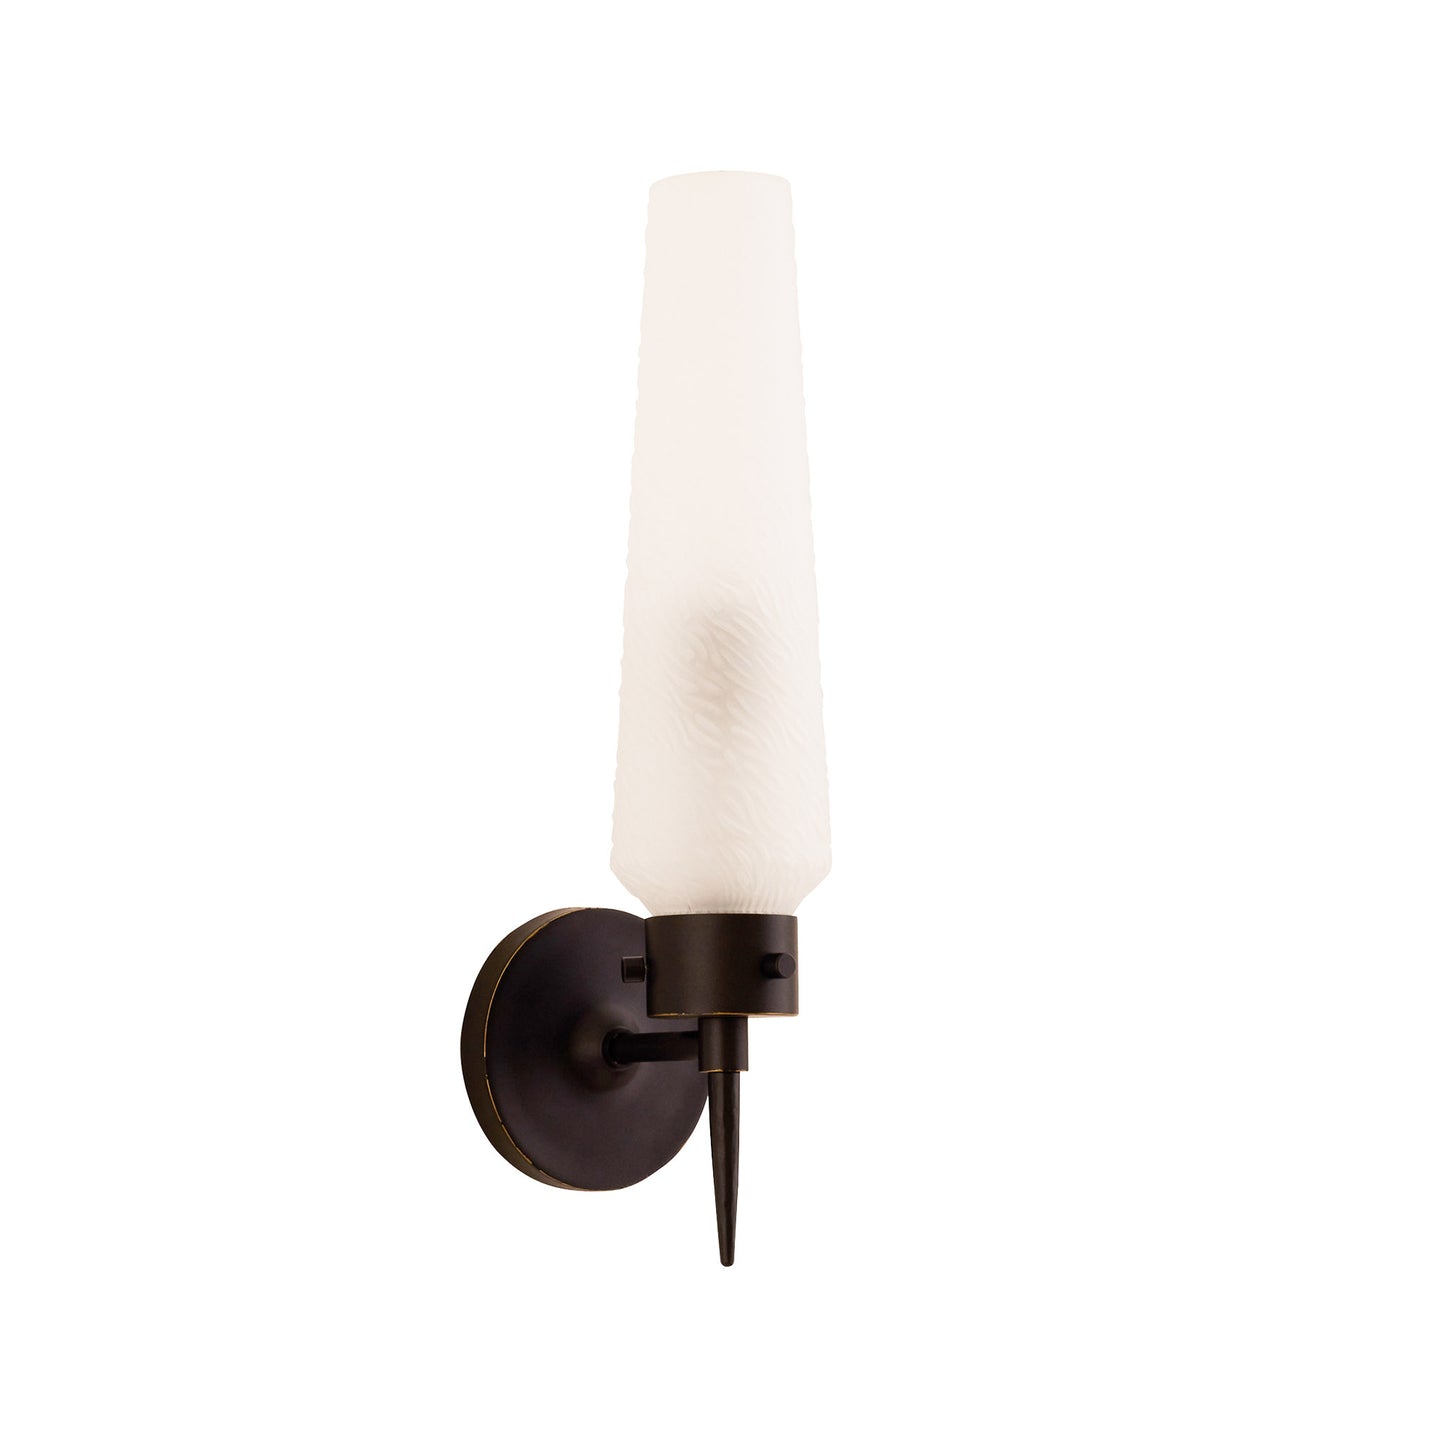 Omaha Sconce - Textured Frosted Glass and Bronze Torchier-Style Wall Light with Forged Finial Detail